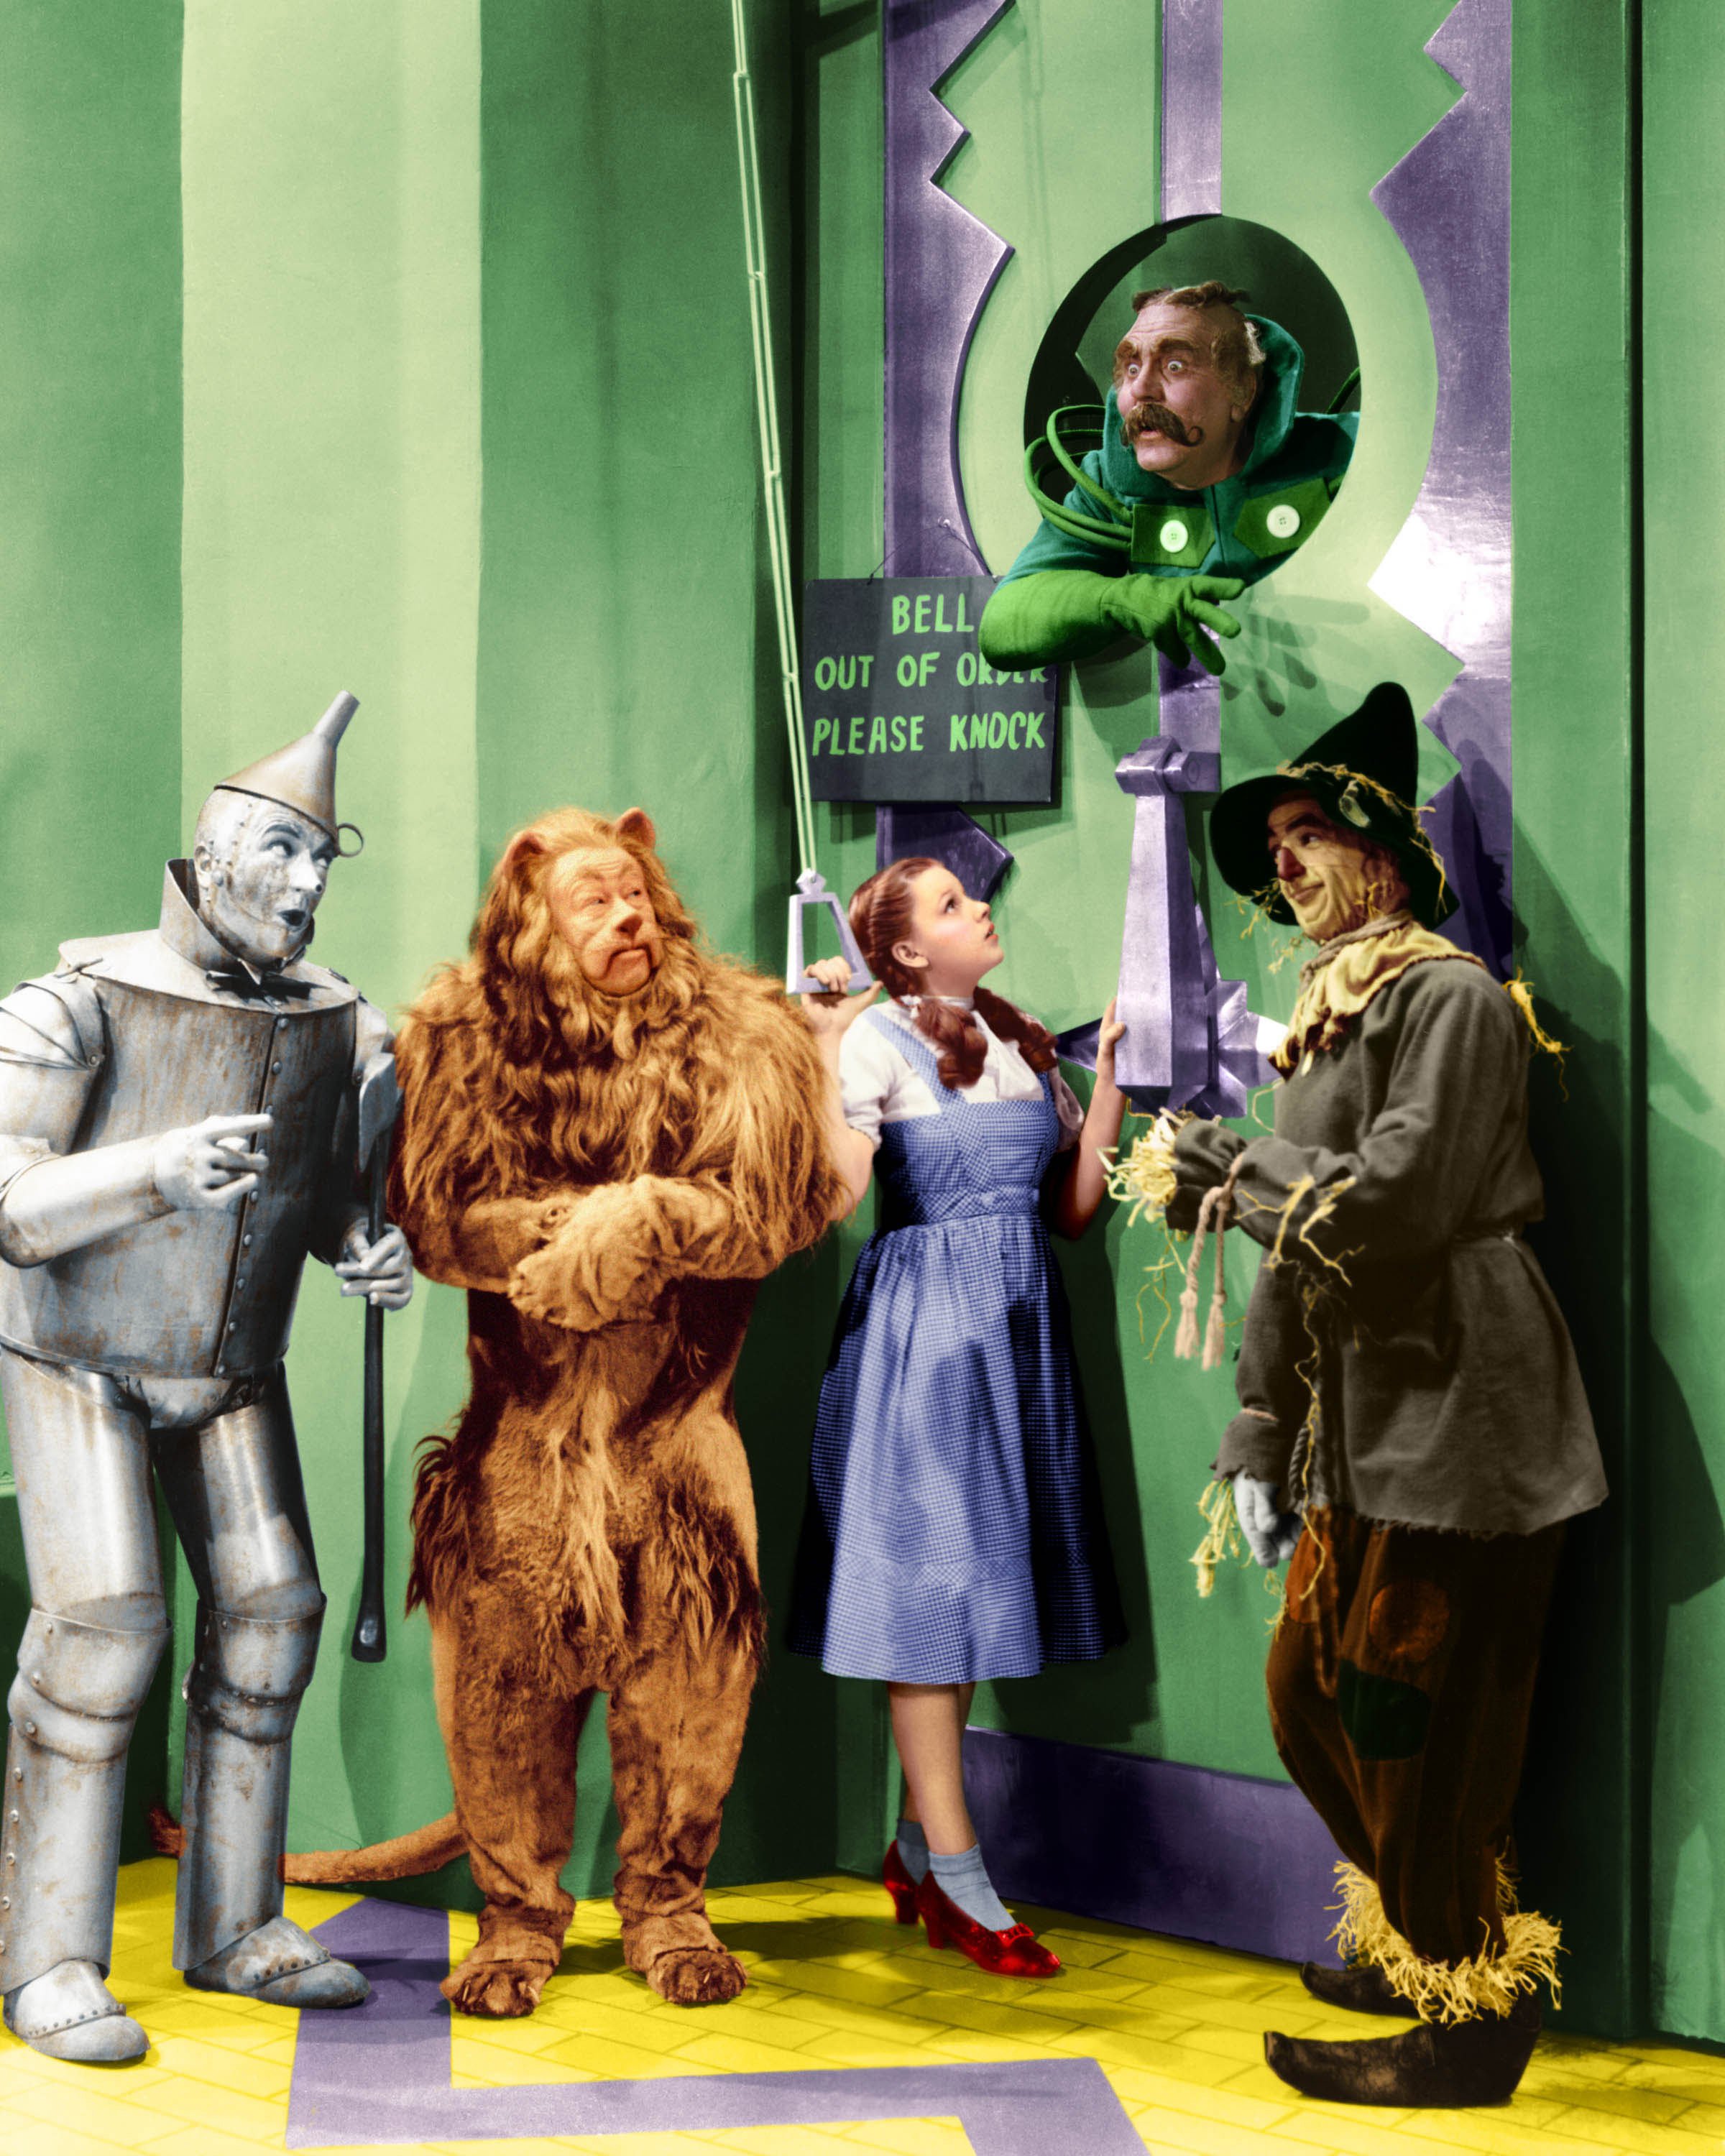 The Wizard of Oz cast outside the Emerald City